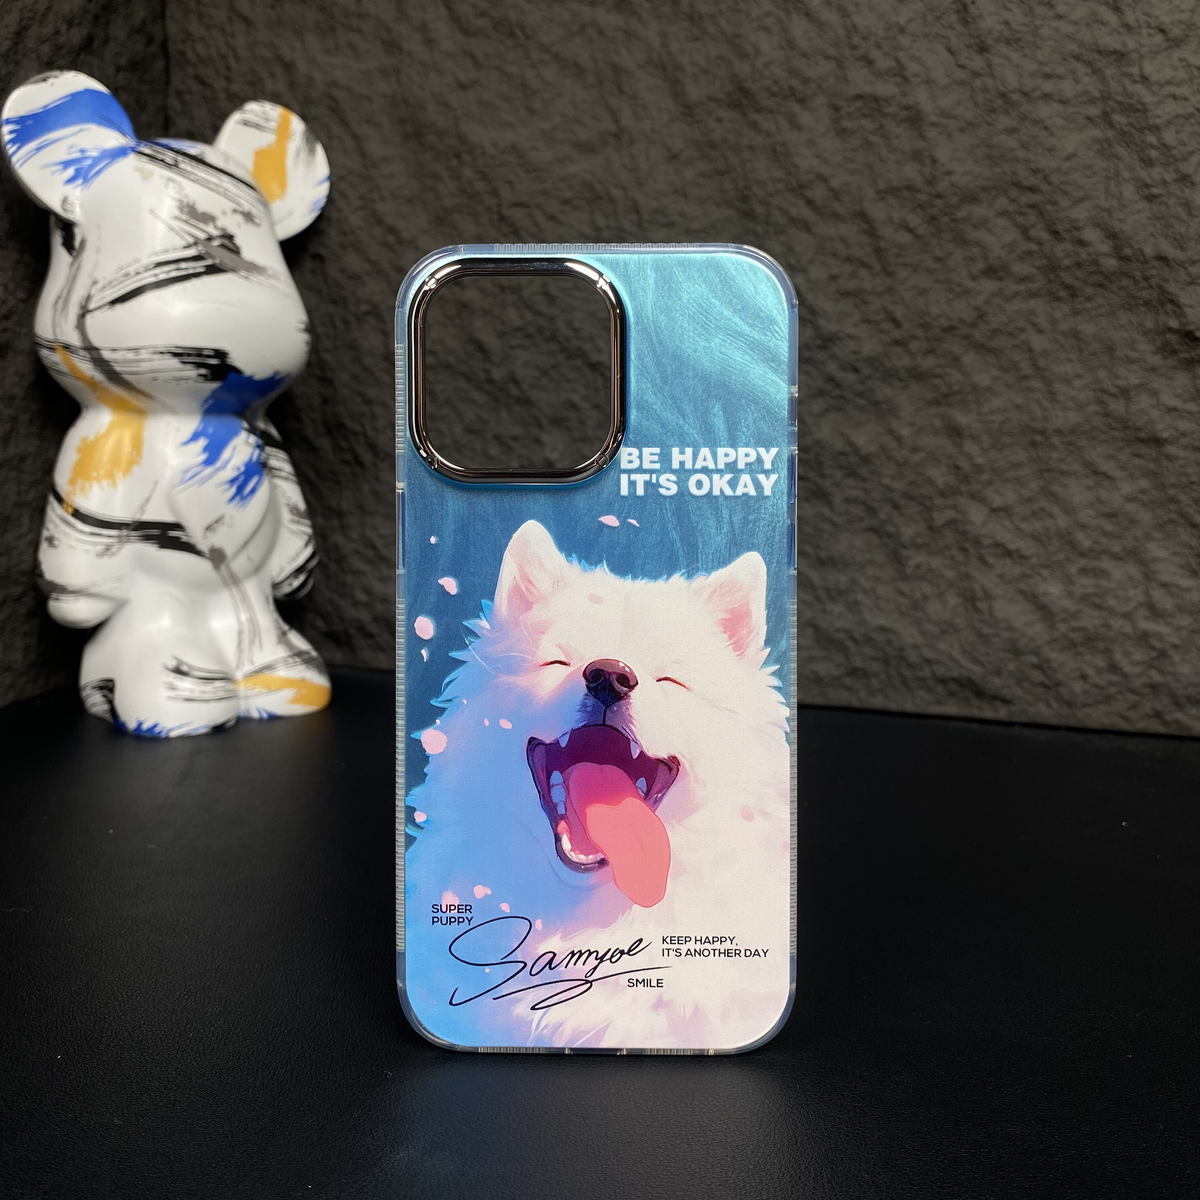 Cute and Playful! Pomeranian and Orange Cat Phone Cases Bring Joy to Your Device! 🐶🐱